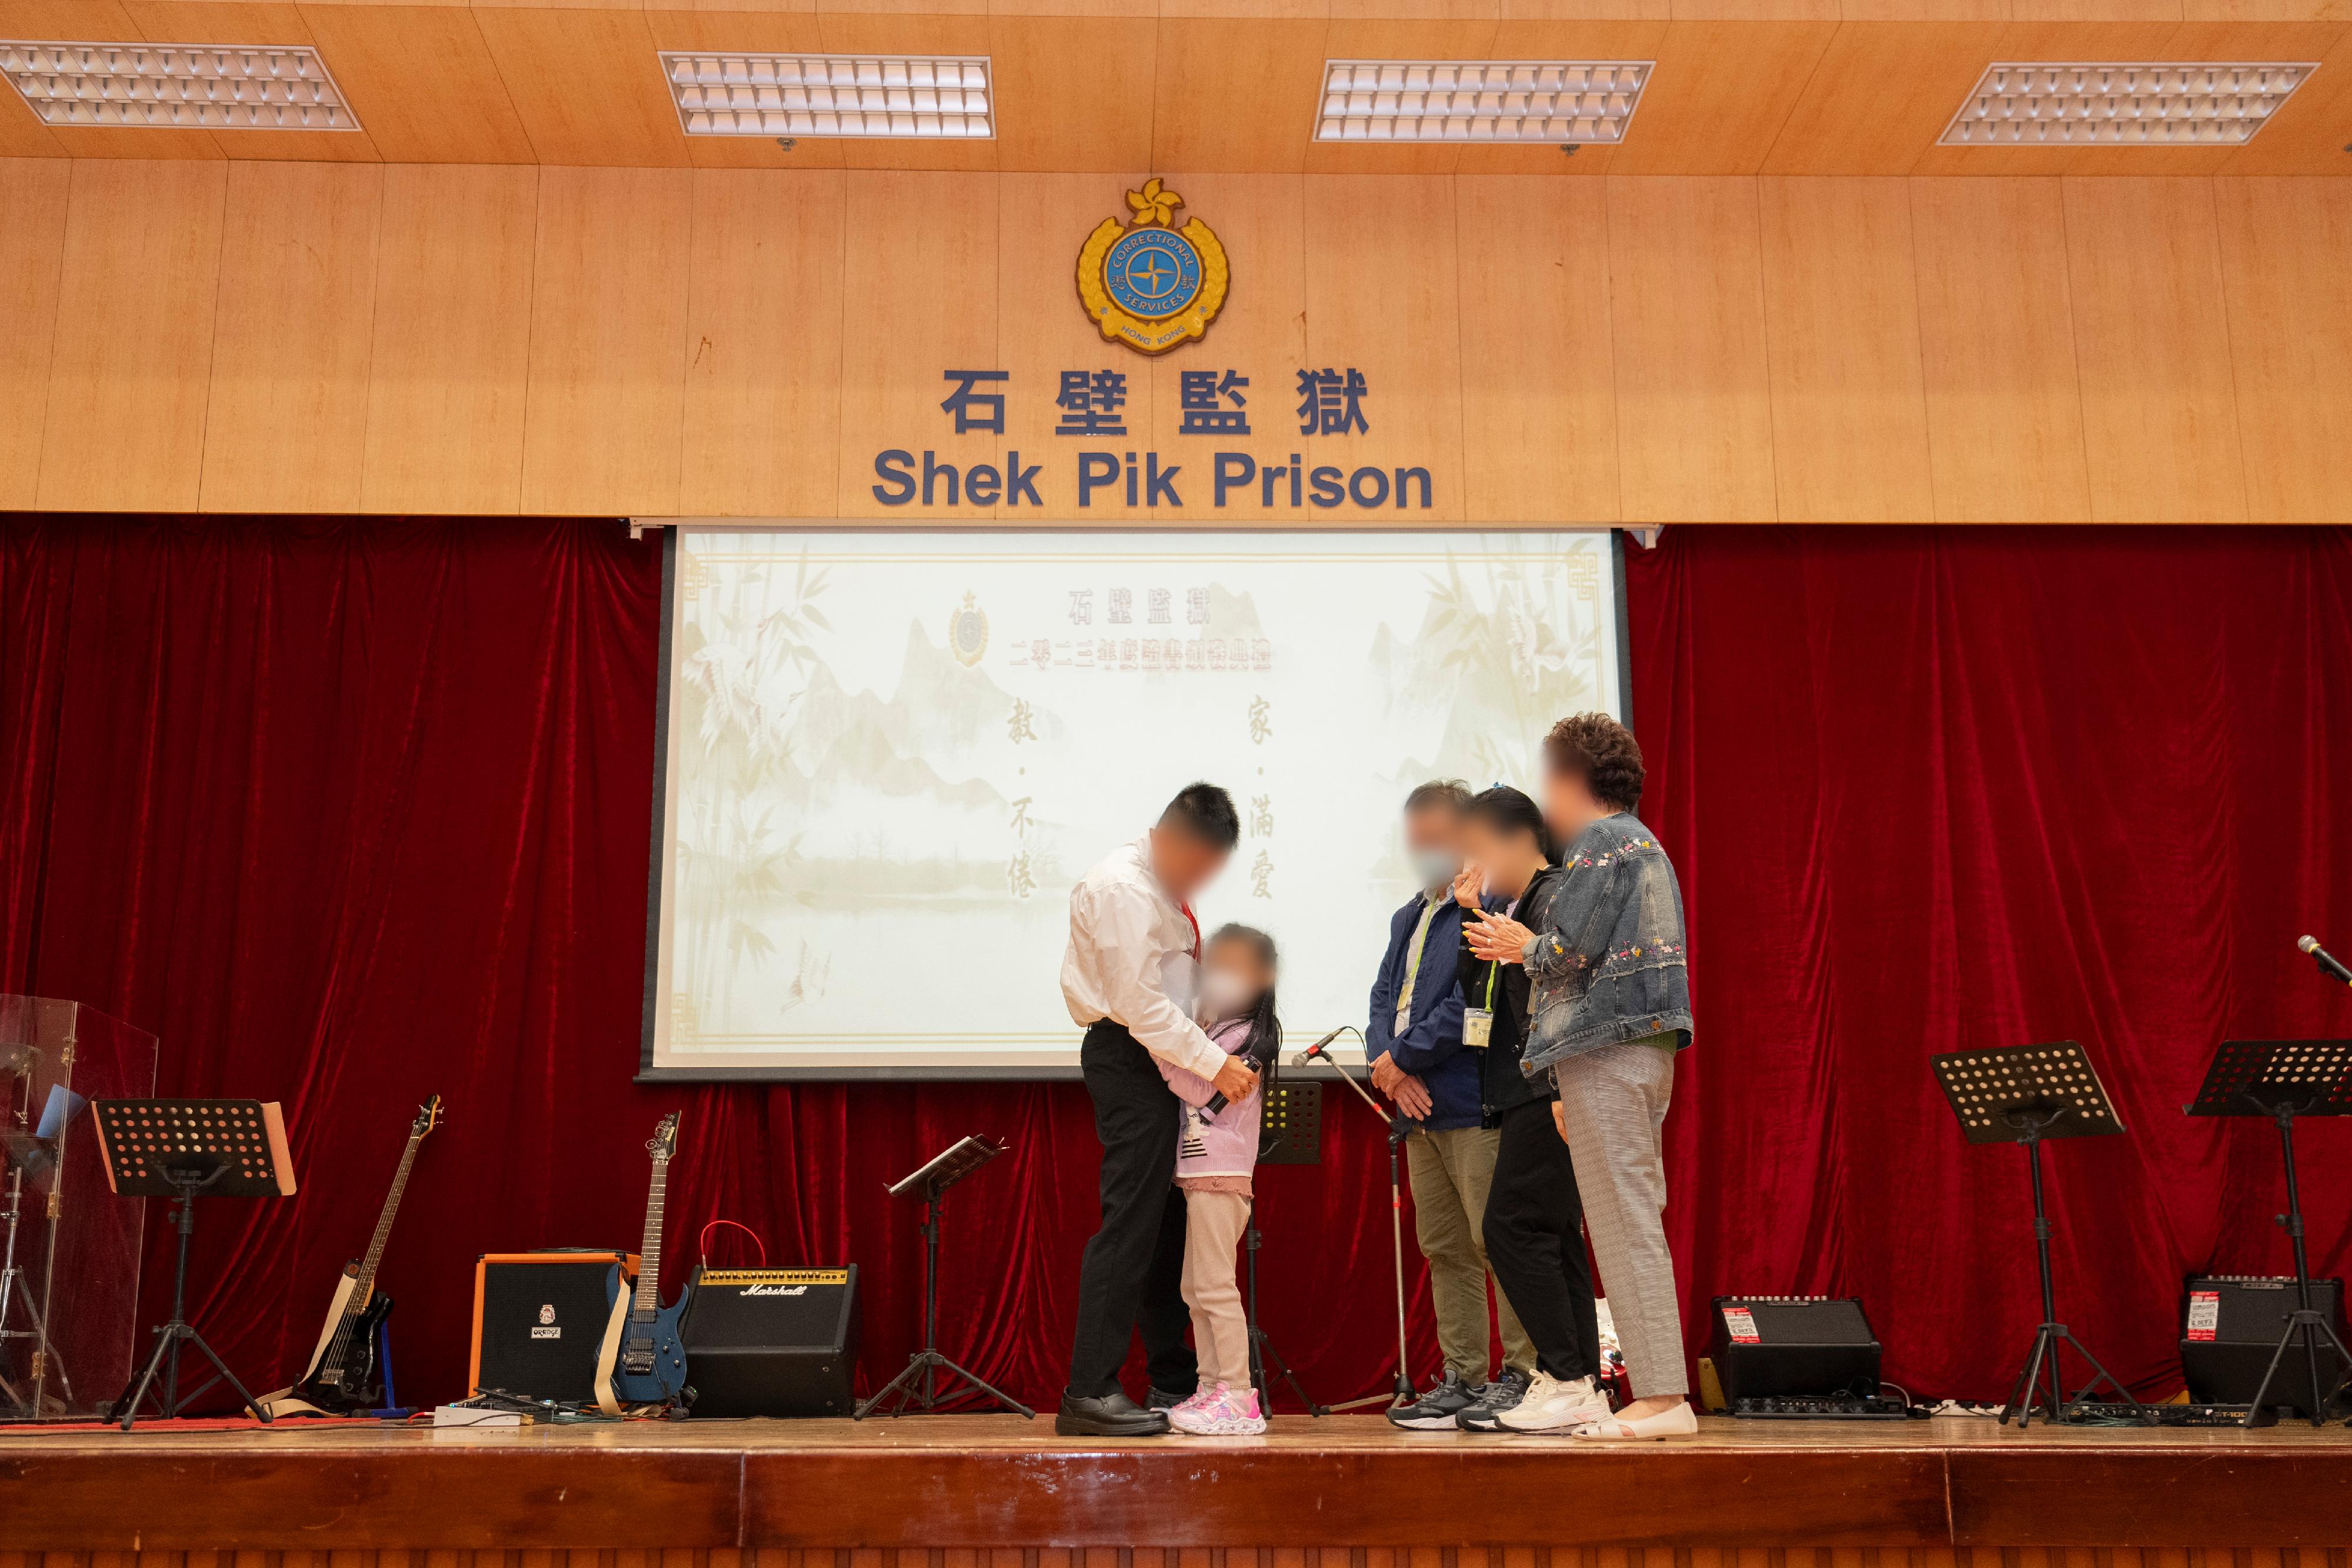 Persons in custody at Shek Pik Prison of the Correctional Services Department were presented with certificates at a ceremony today (November 23) in recognition of their study efforts and academic achievements. Photo shows a person in custody expressing gratitude to his family members.